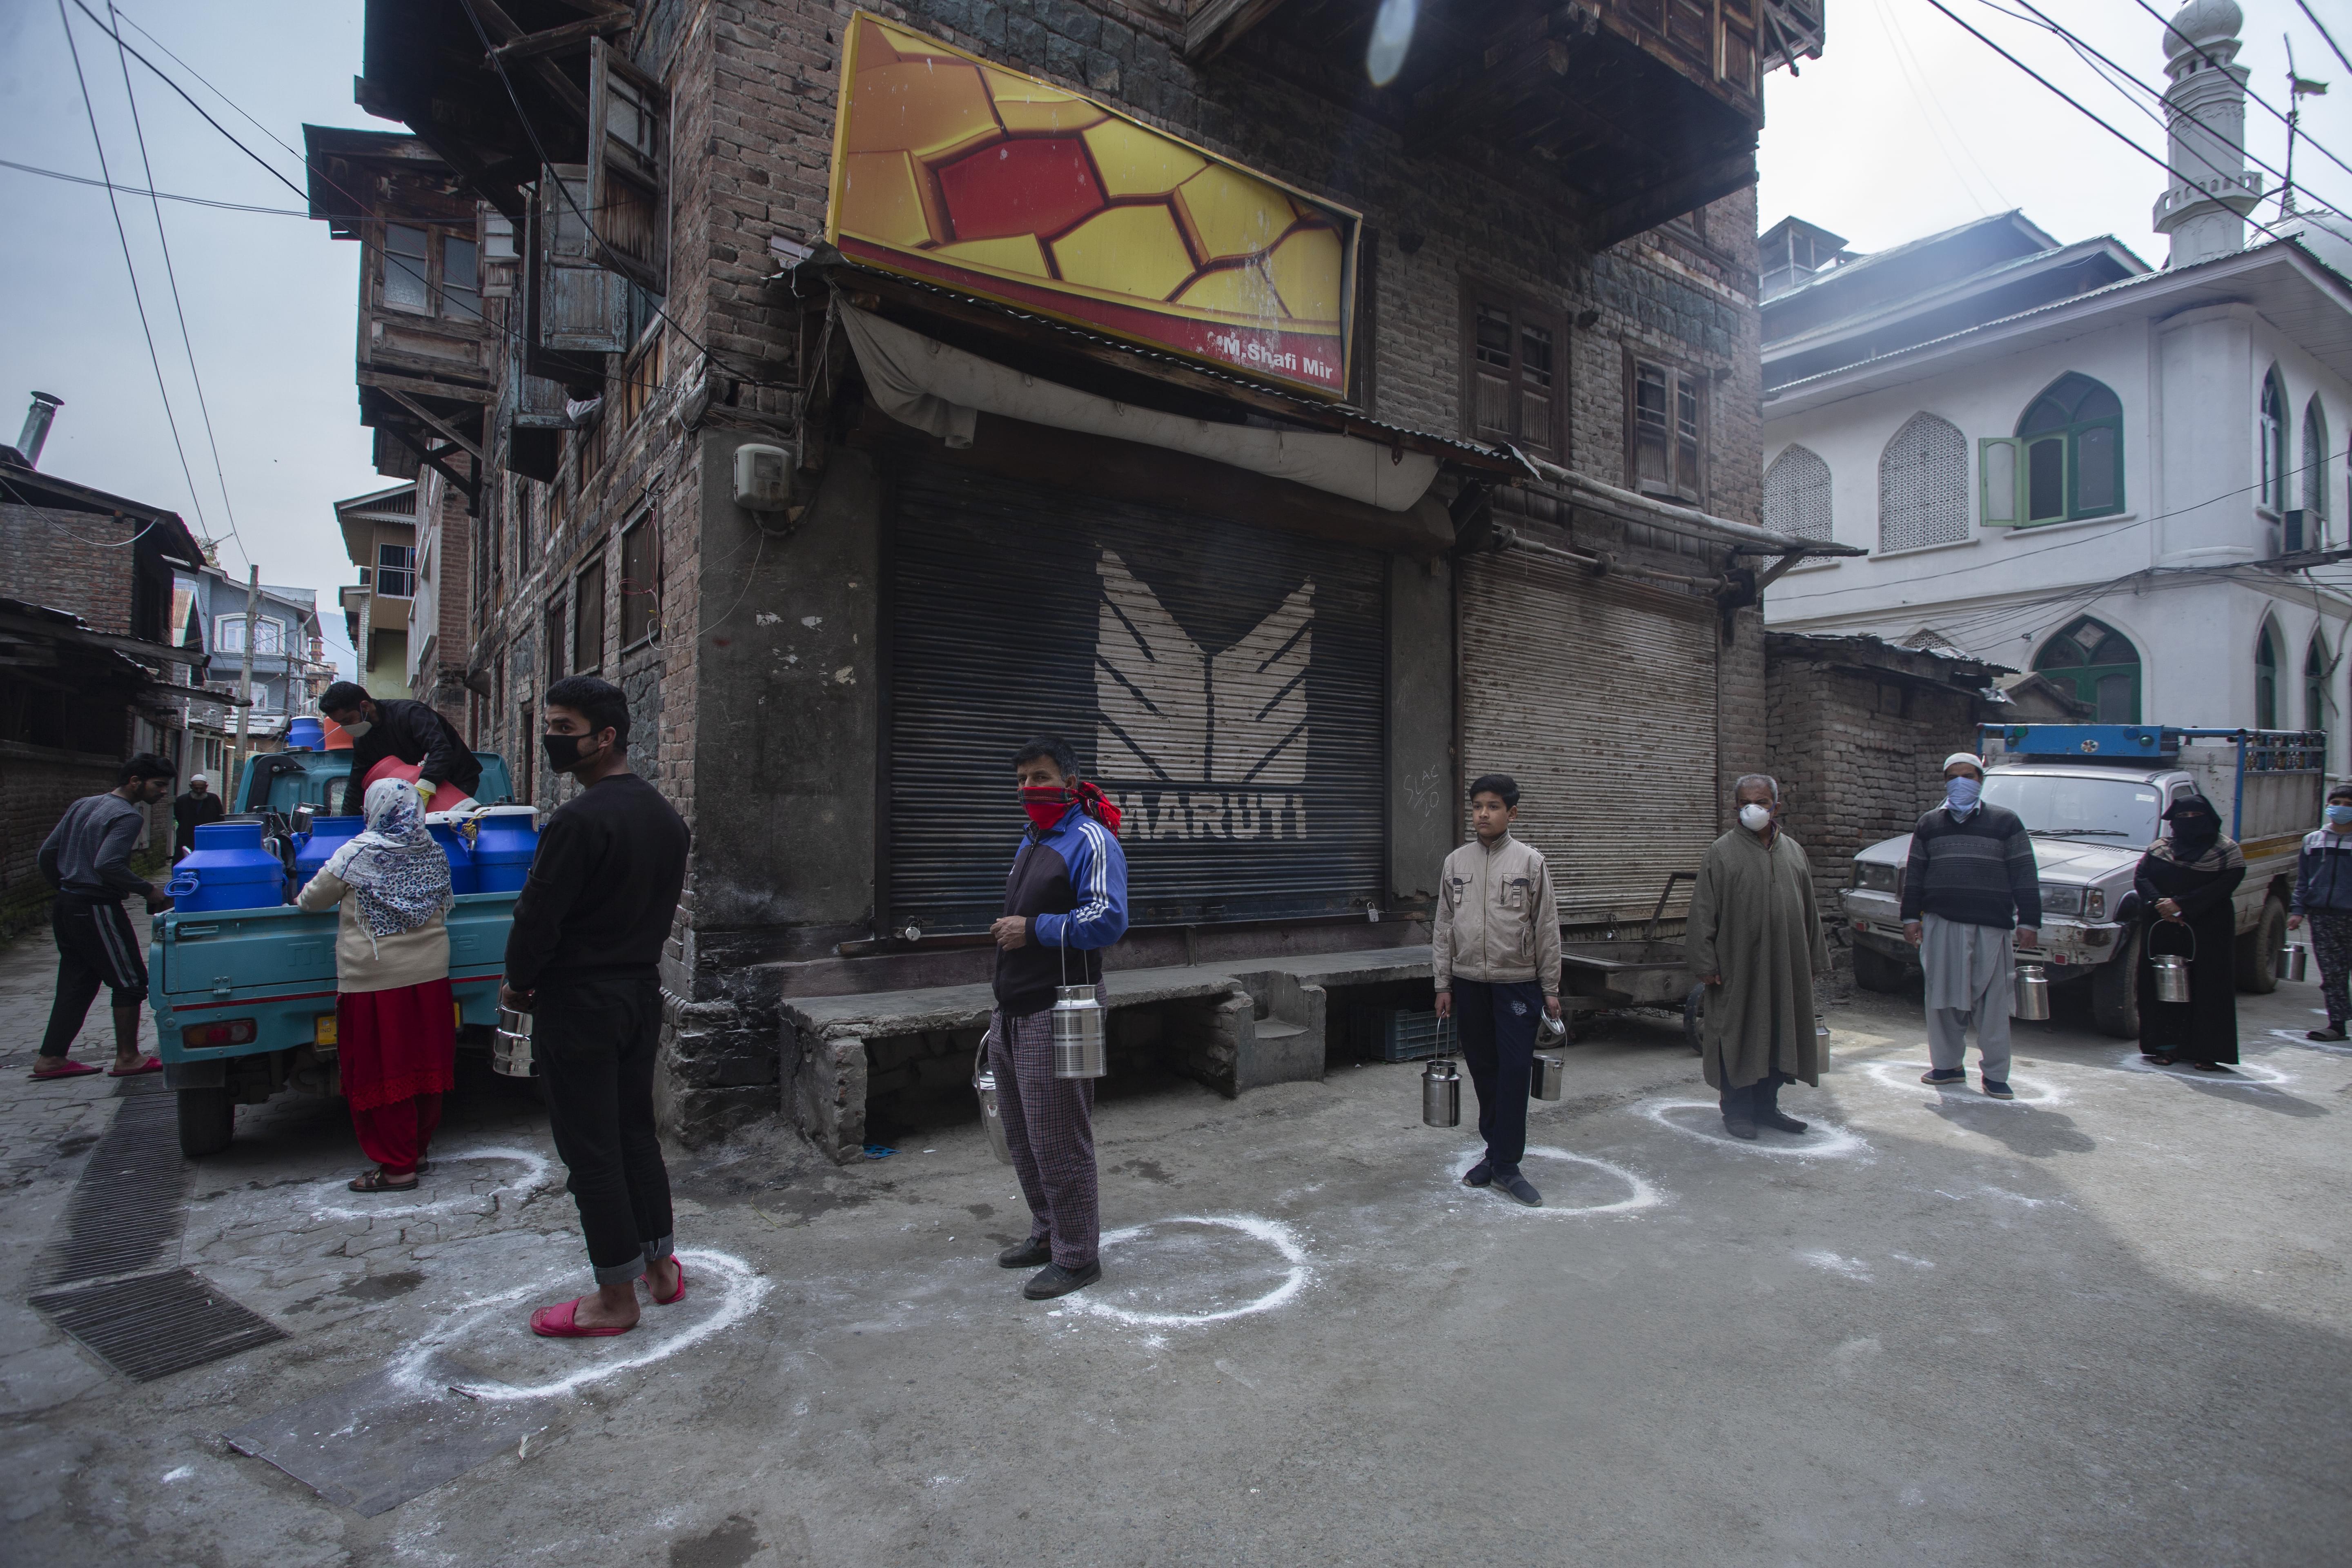 People queue for milk during the pandemic in Kashmir. Photo by Abid Bhat, used with permission.